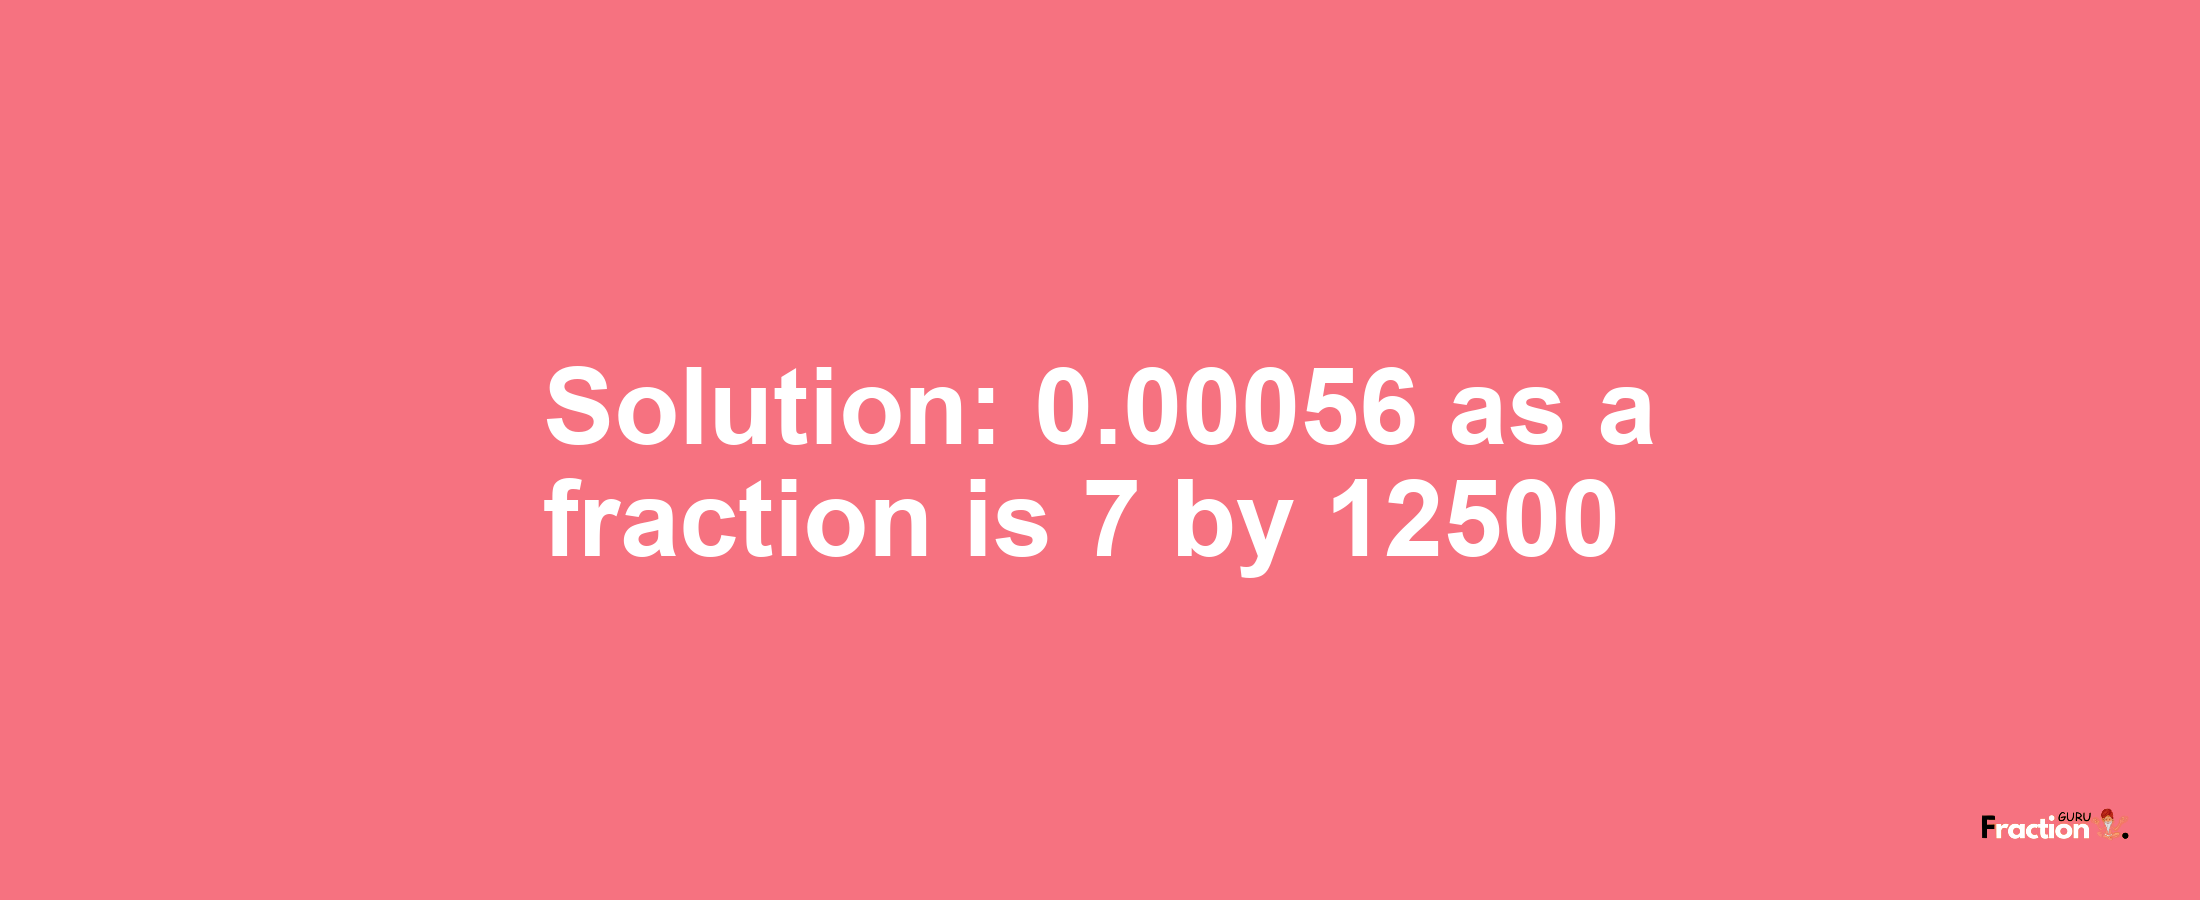 Solution:0.00056 as a fraction is 7/12500